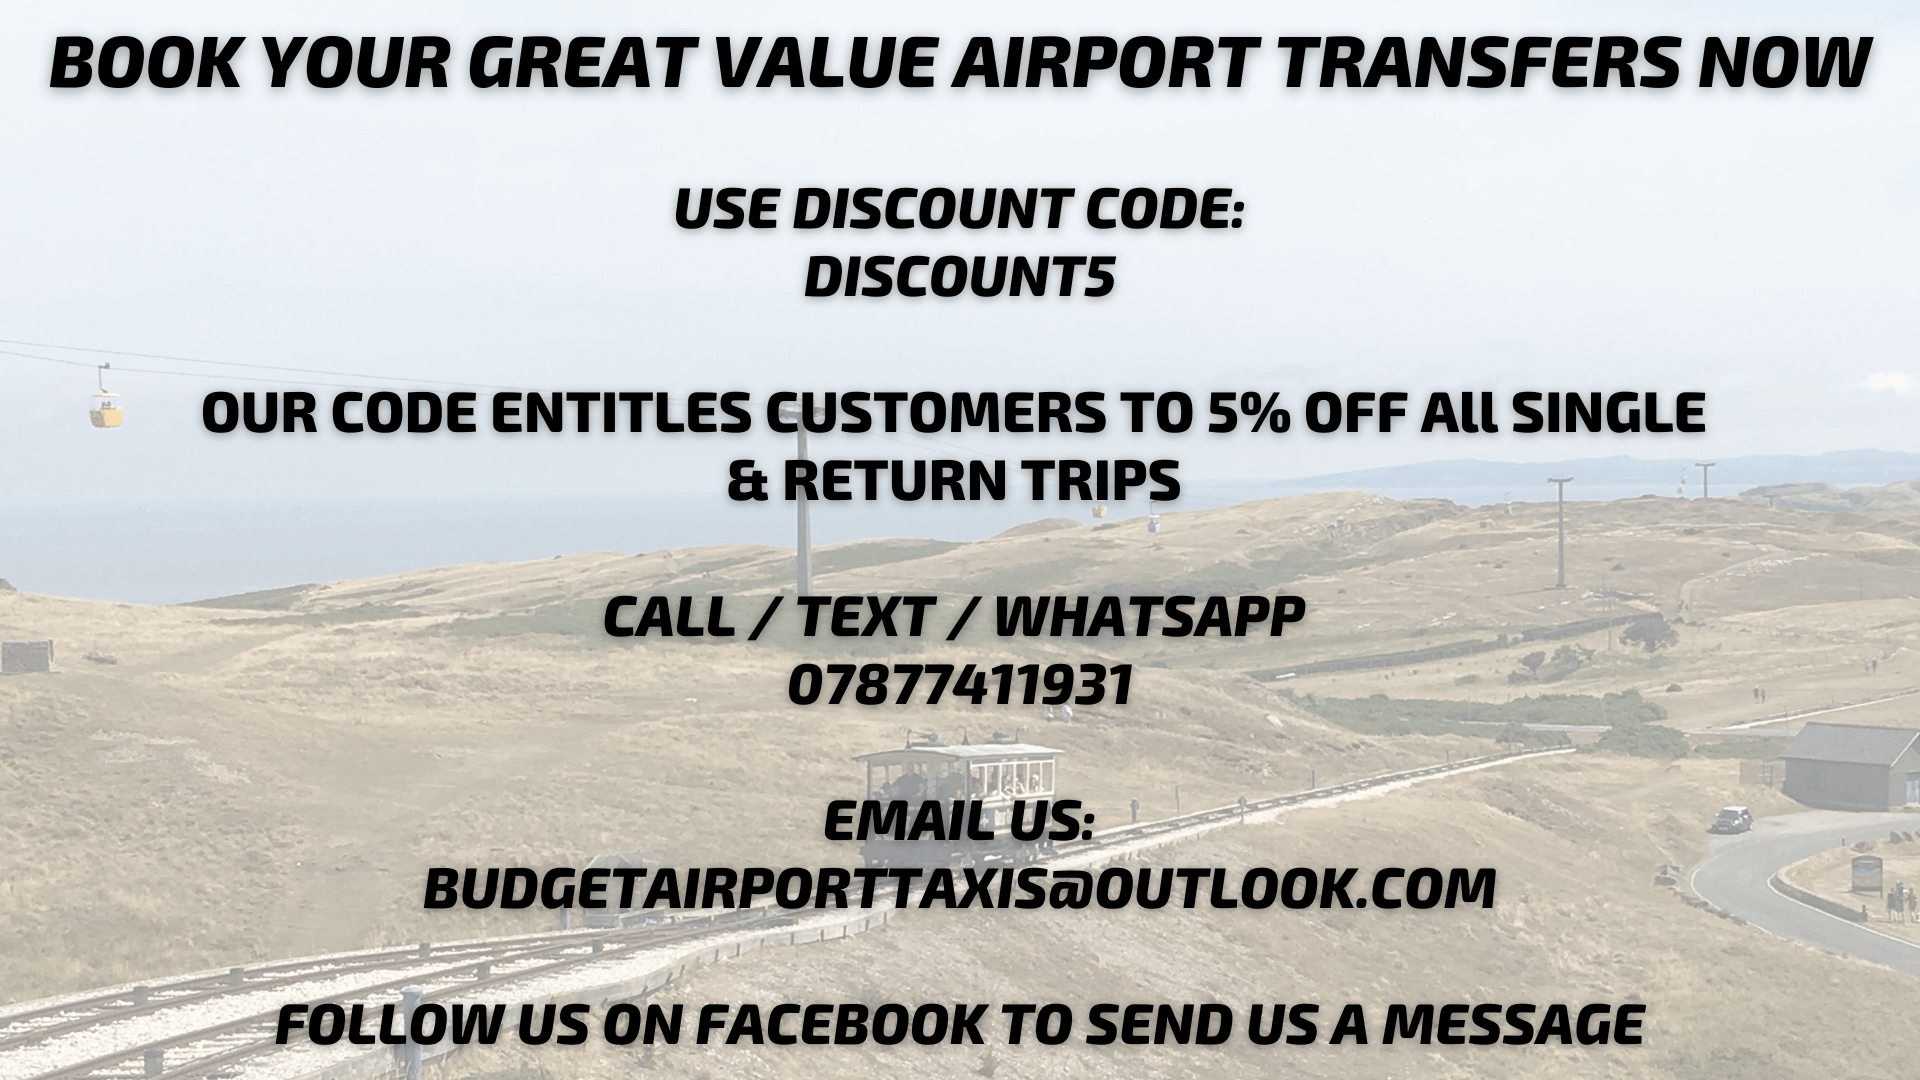 campbeltown airport taxi transfer 5% discount